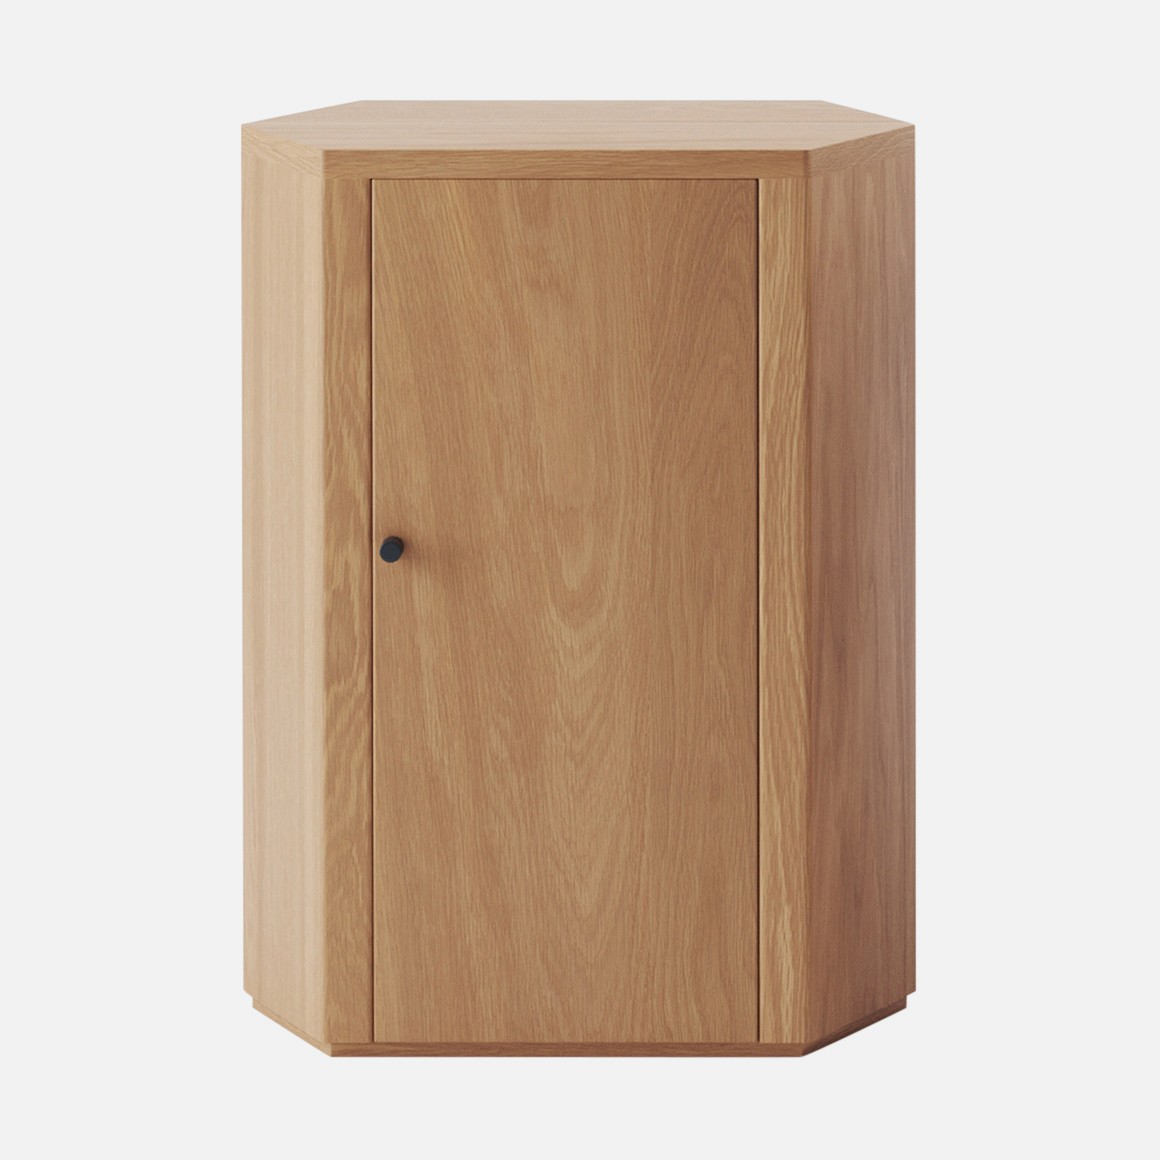 a wooden cabinet with a door on the side